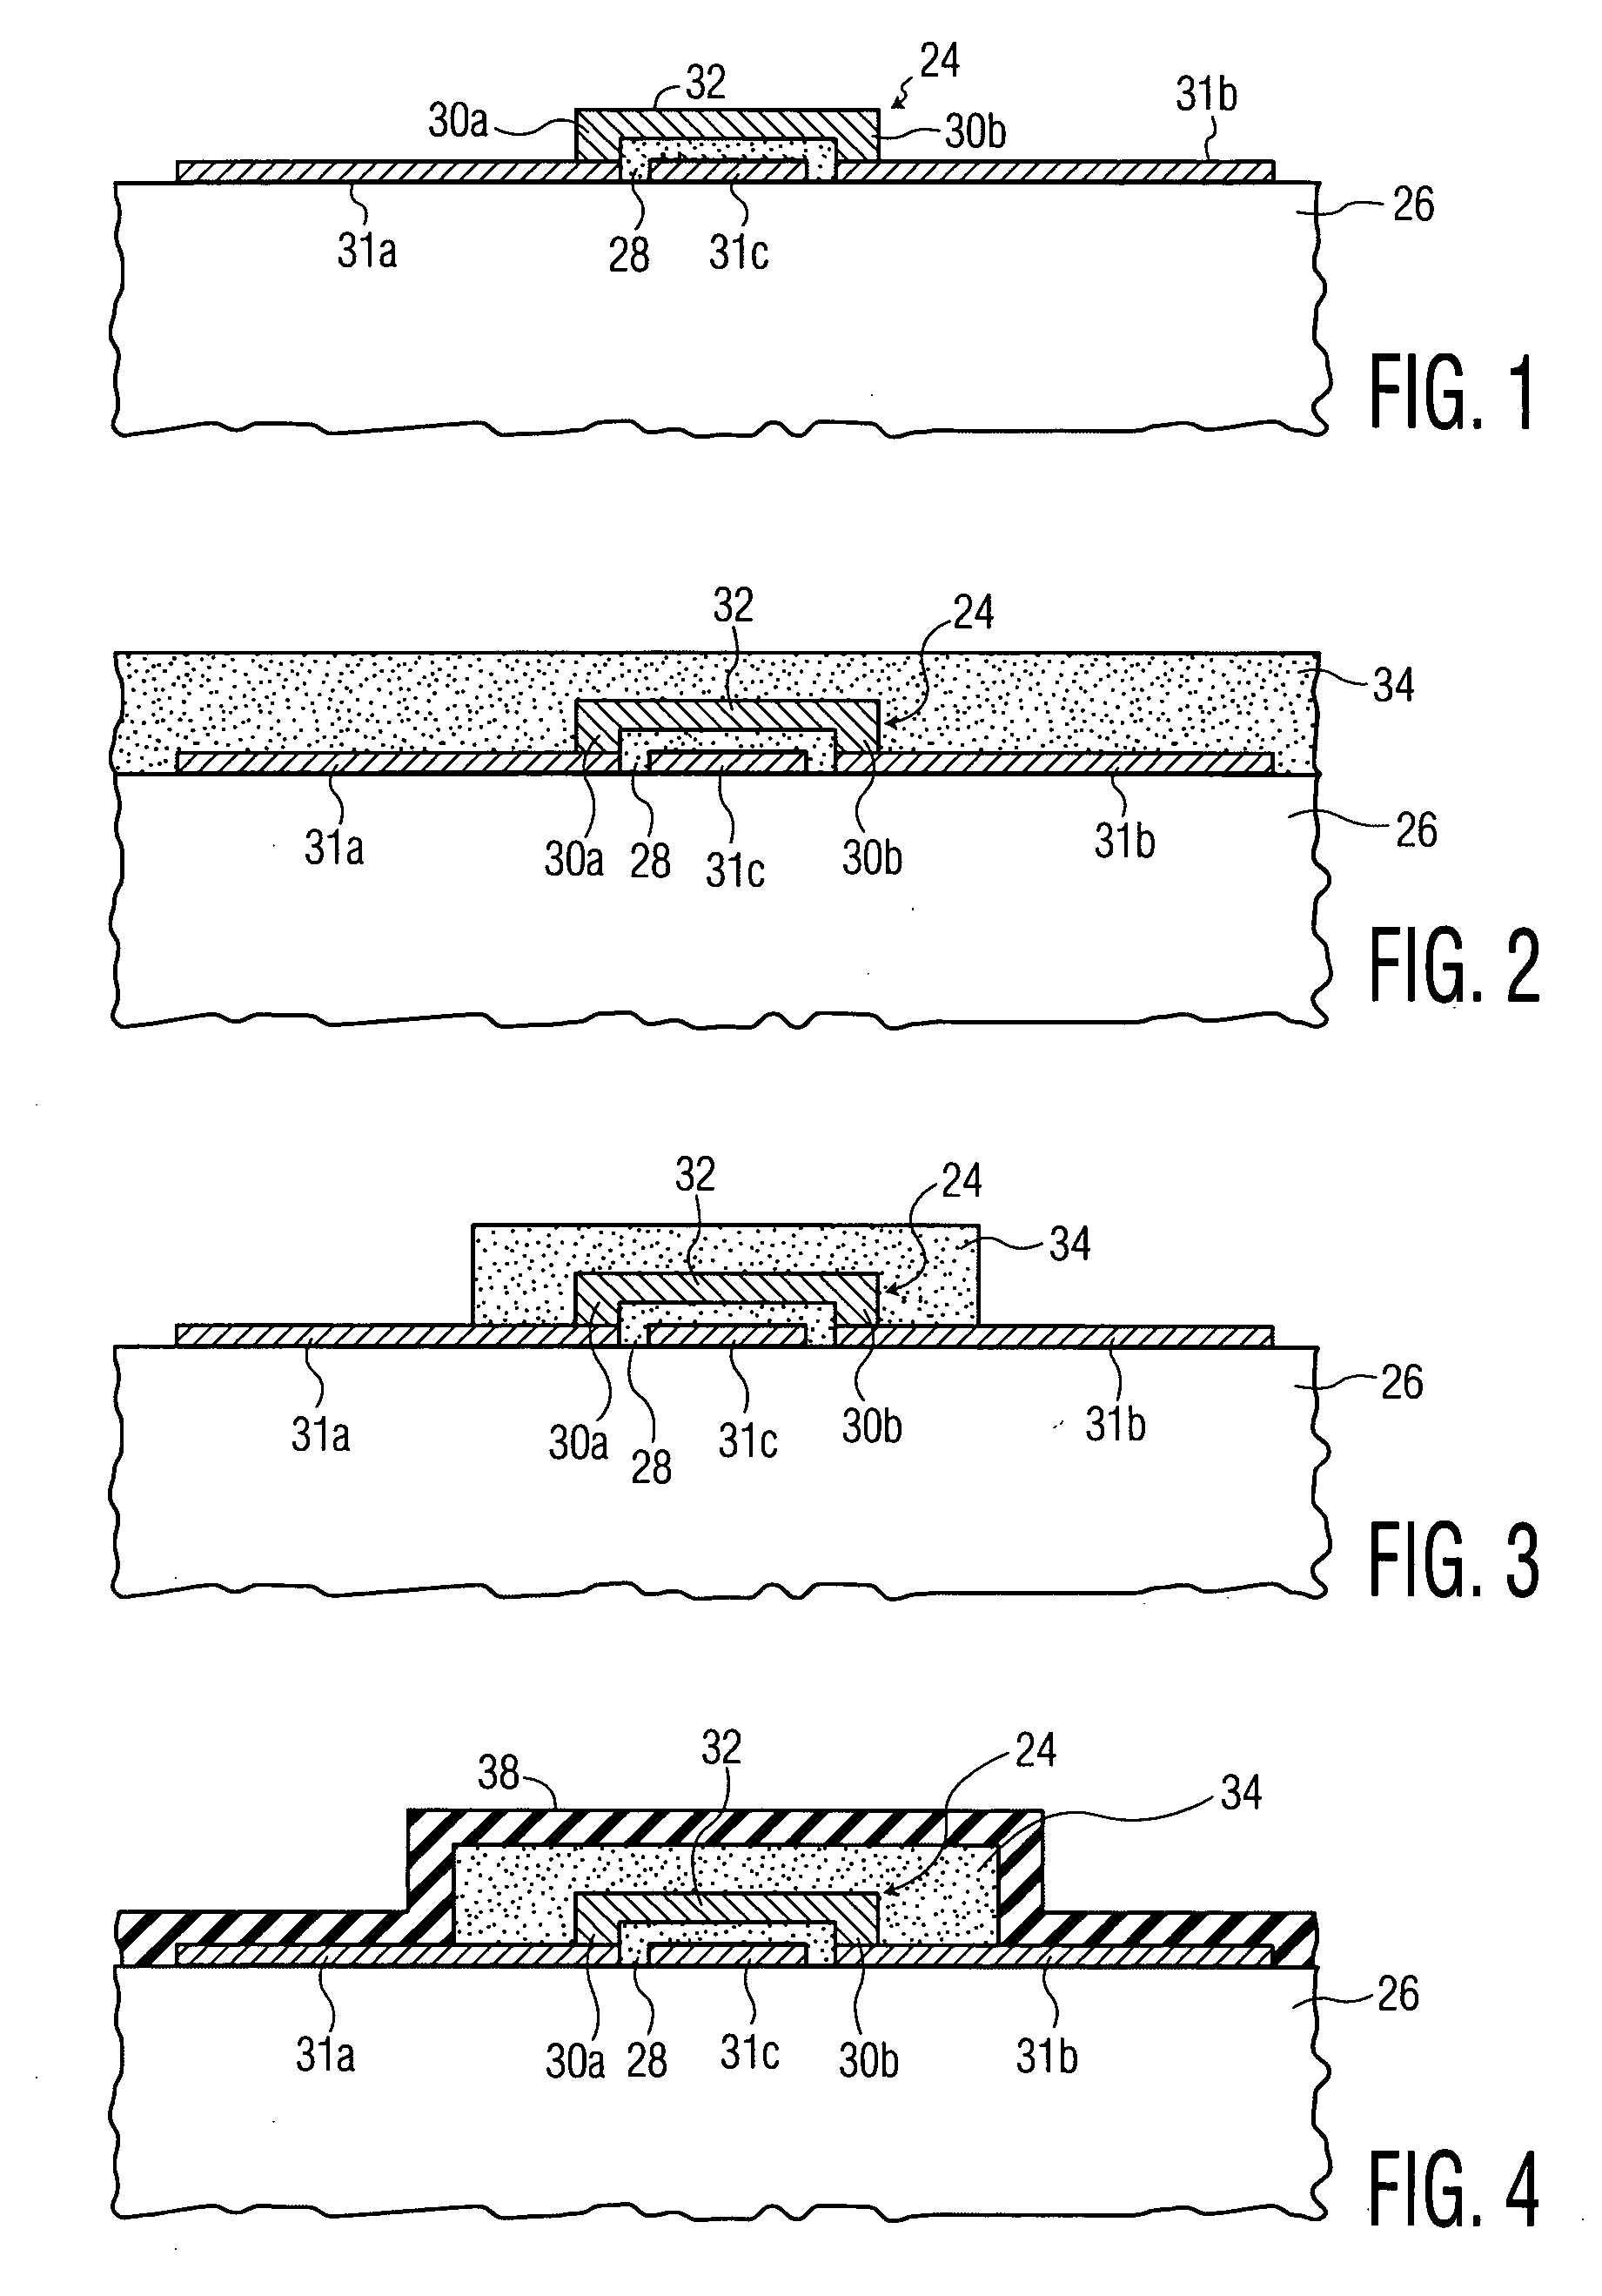 Processes for hermetically packaging wafer level microscopic structures